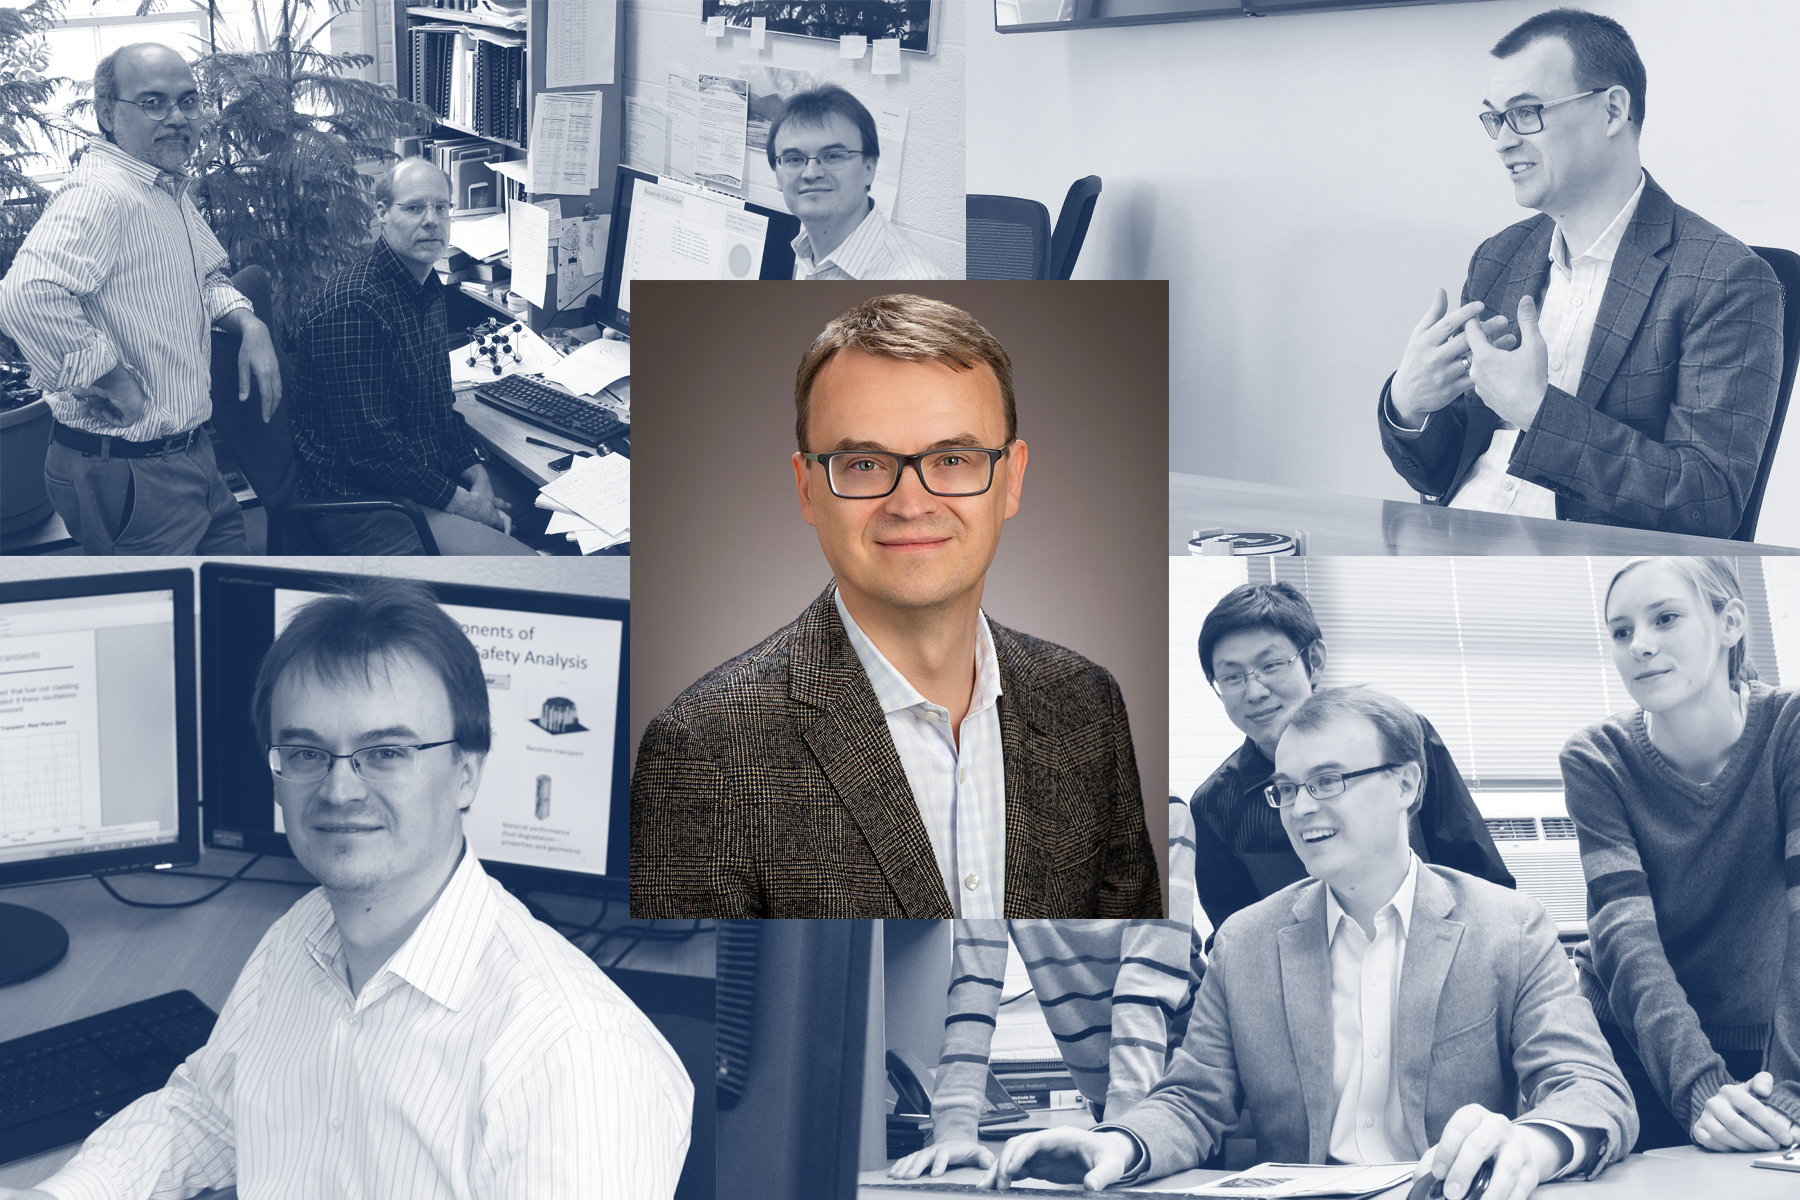 Q & A: Tomasz Kozlowski discusses his promotion to full professor and his NPRE outlook